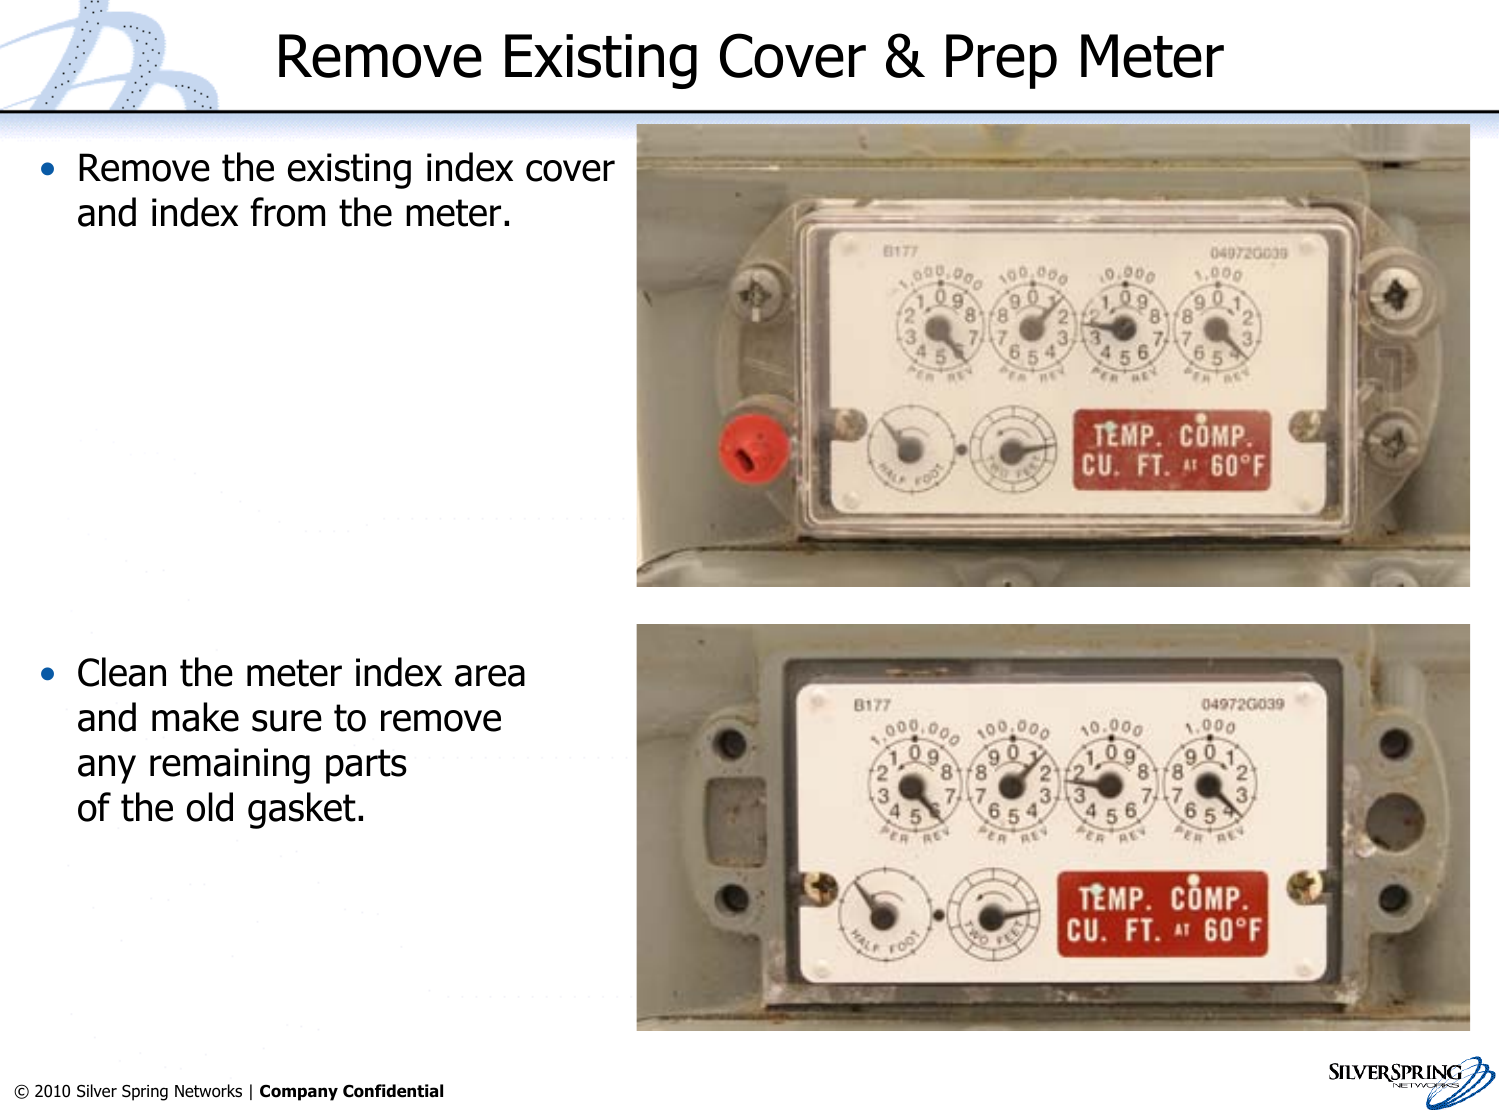 9© 2010 Silver Spring Networks | Company Confidential Remove Existing Cover &amp; Prep Meter•Remove the existing index coverand index from the meter.•Clean the meter index areaand make sure to removeany remaining partsof the old gasket.